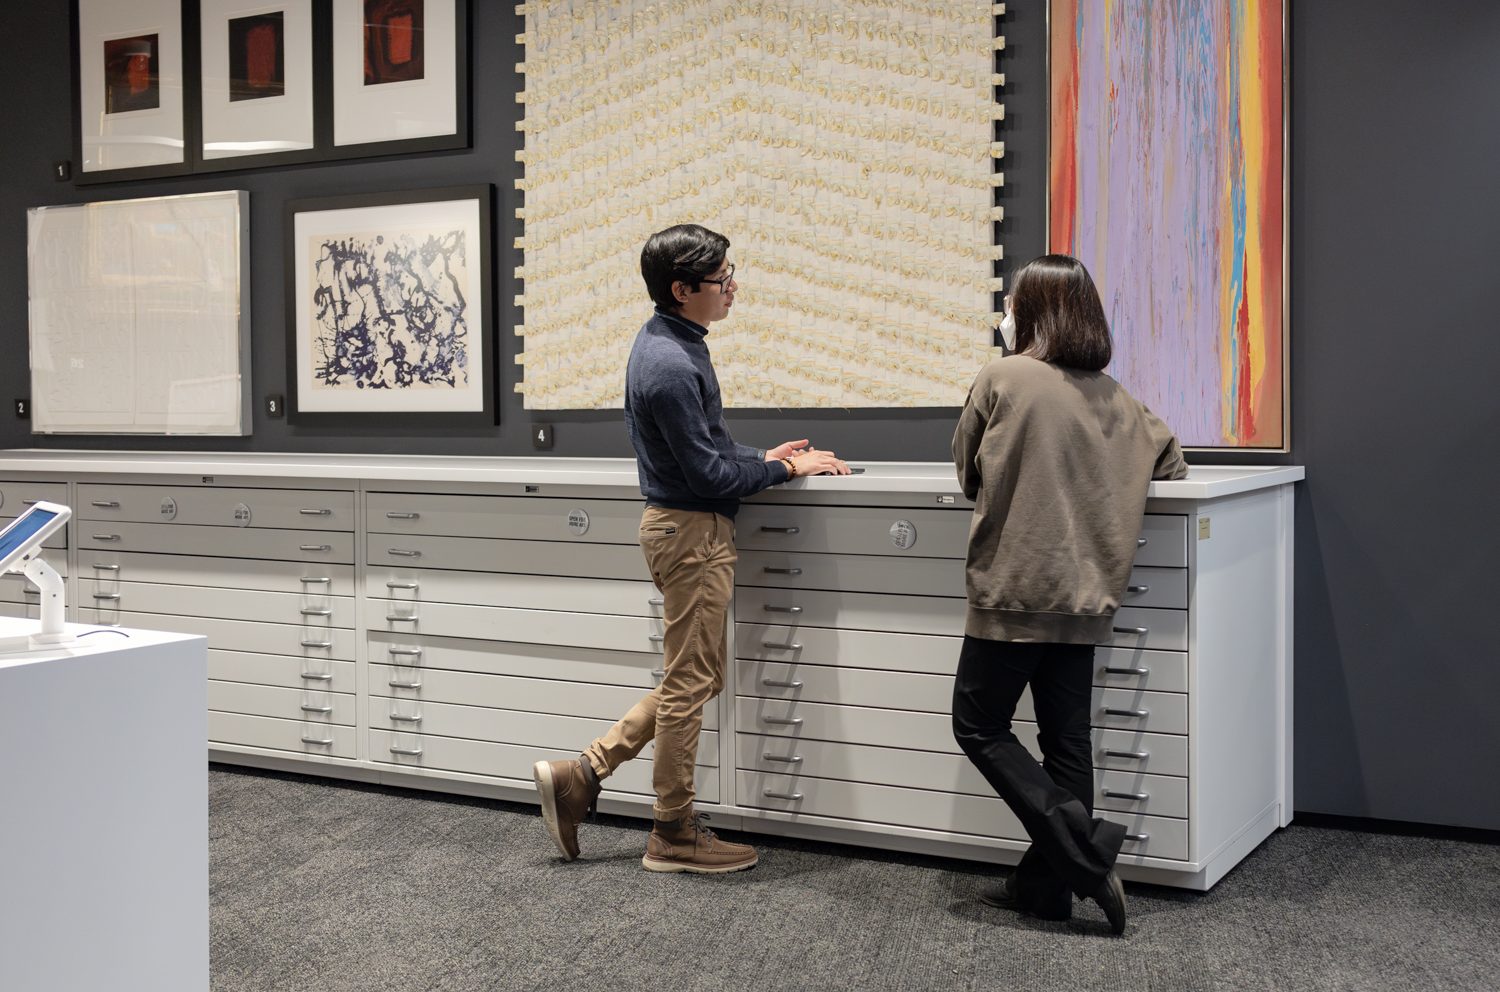 Two people standing at a counter looking at art